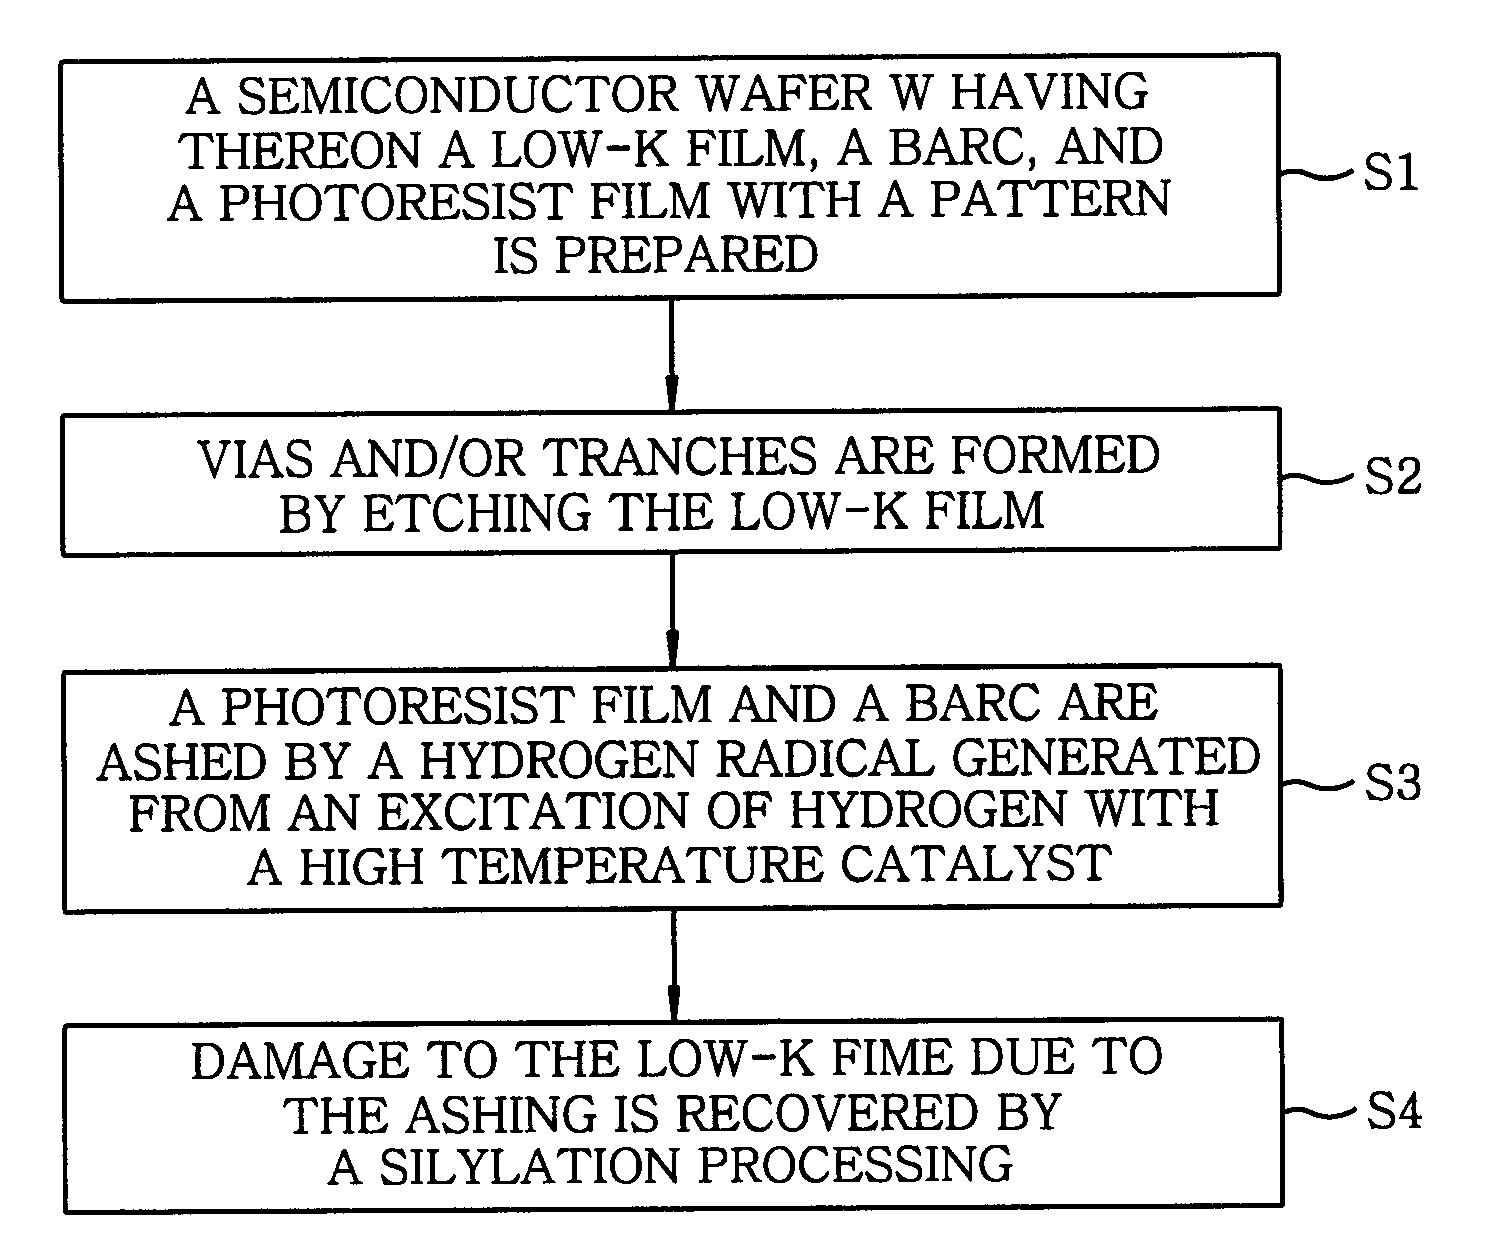 Substrate processing method, substrate processing system, and computer-readable storage medium